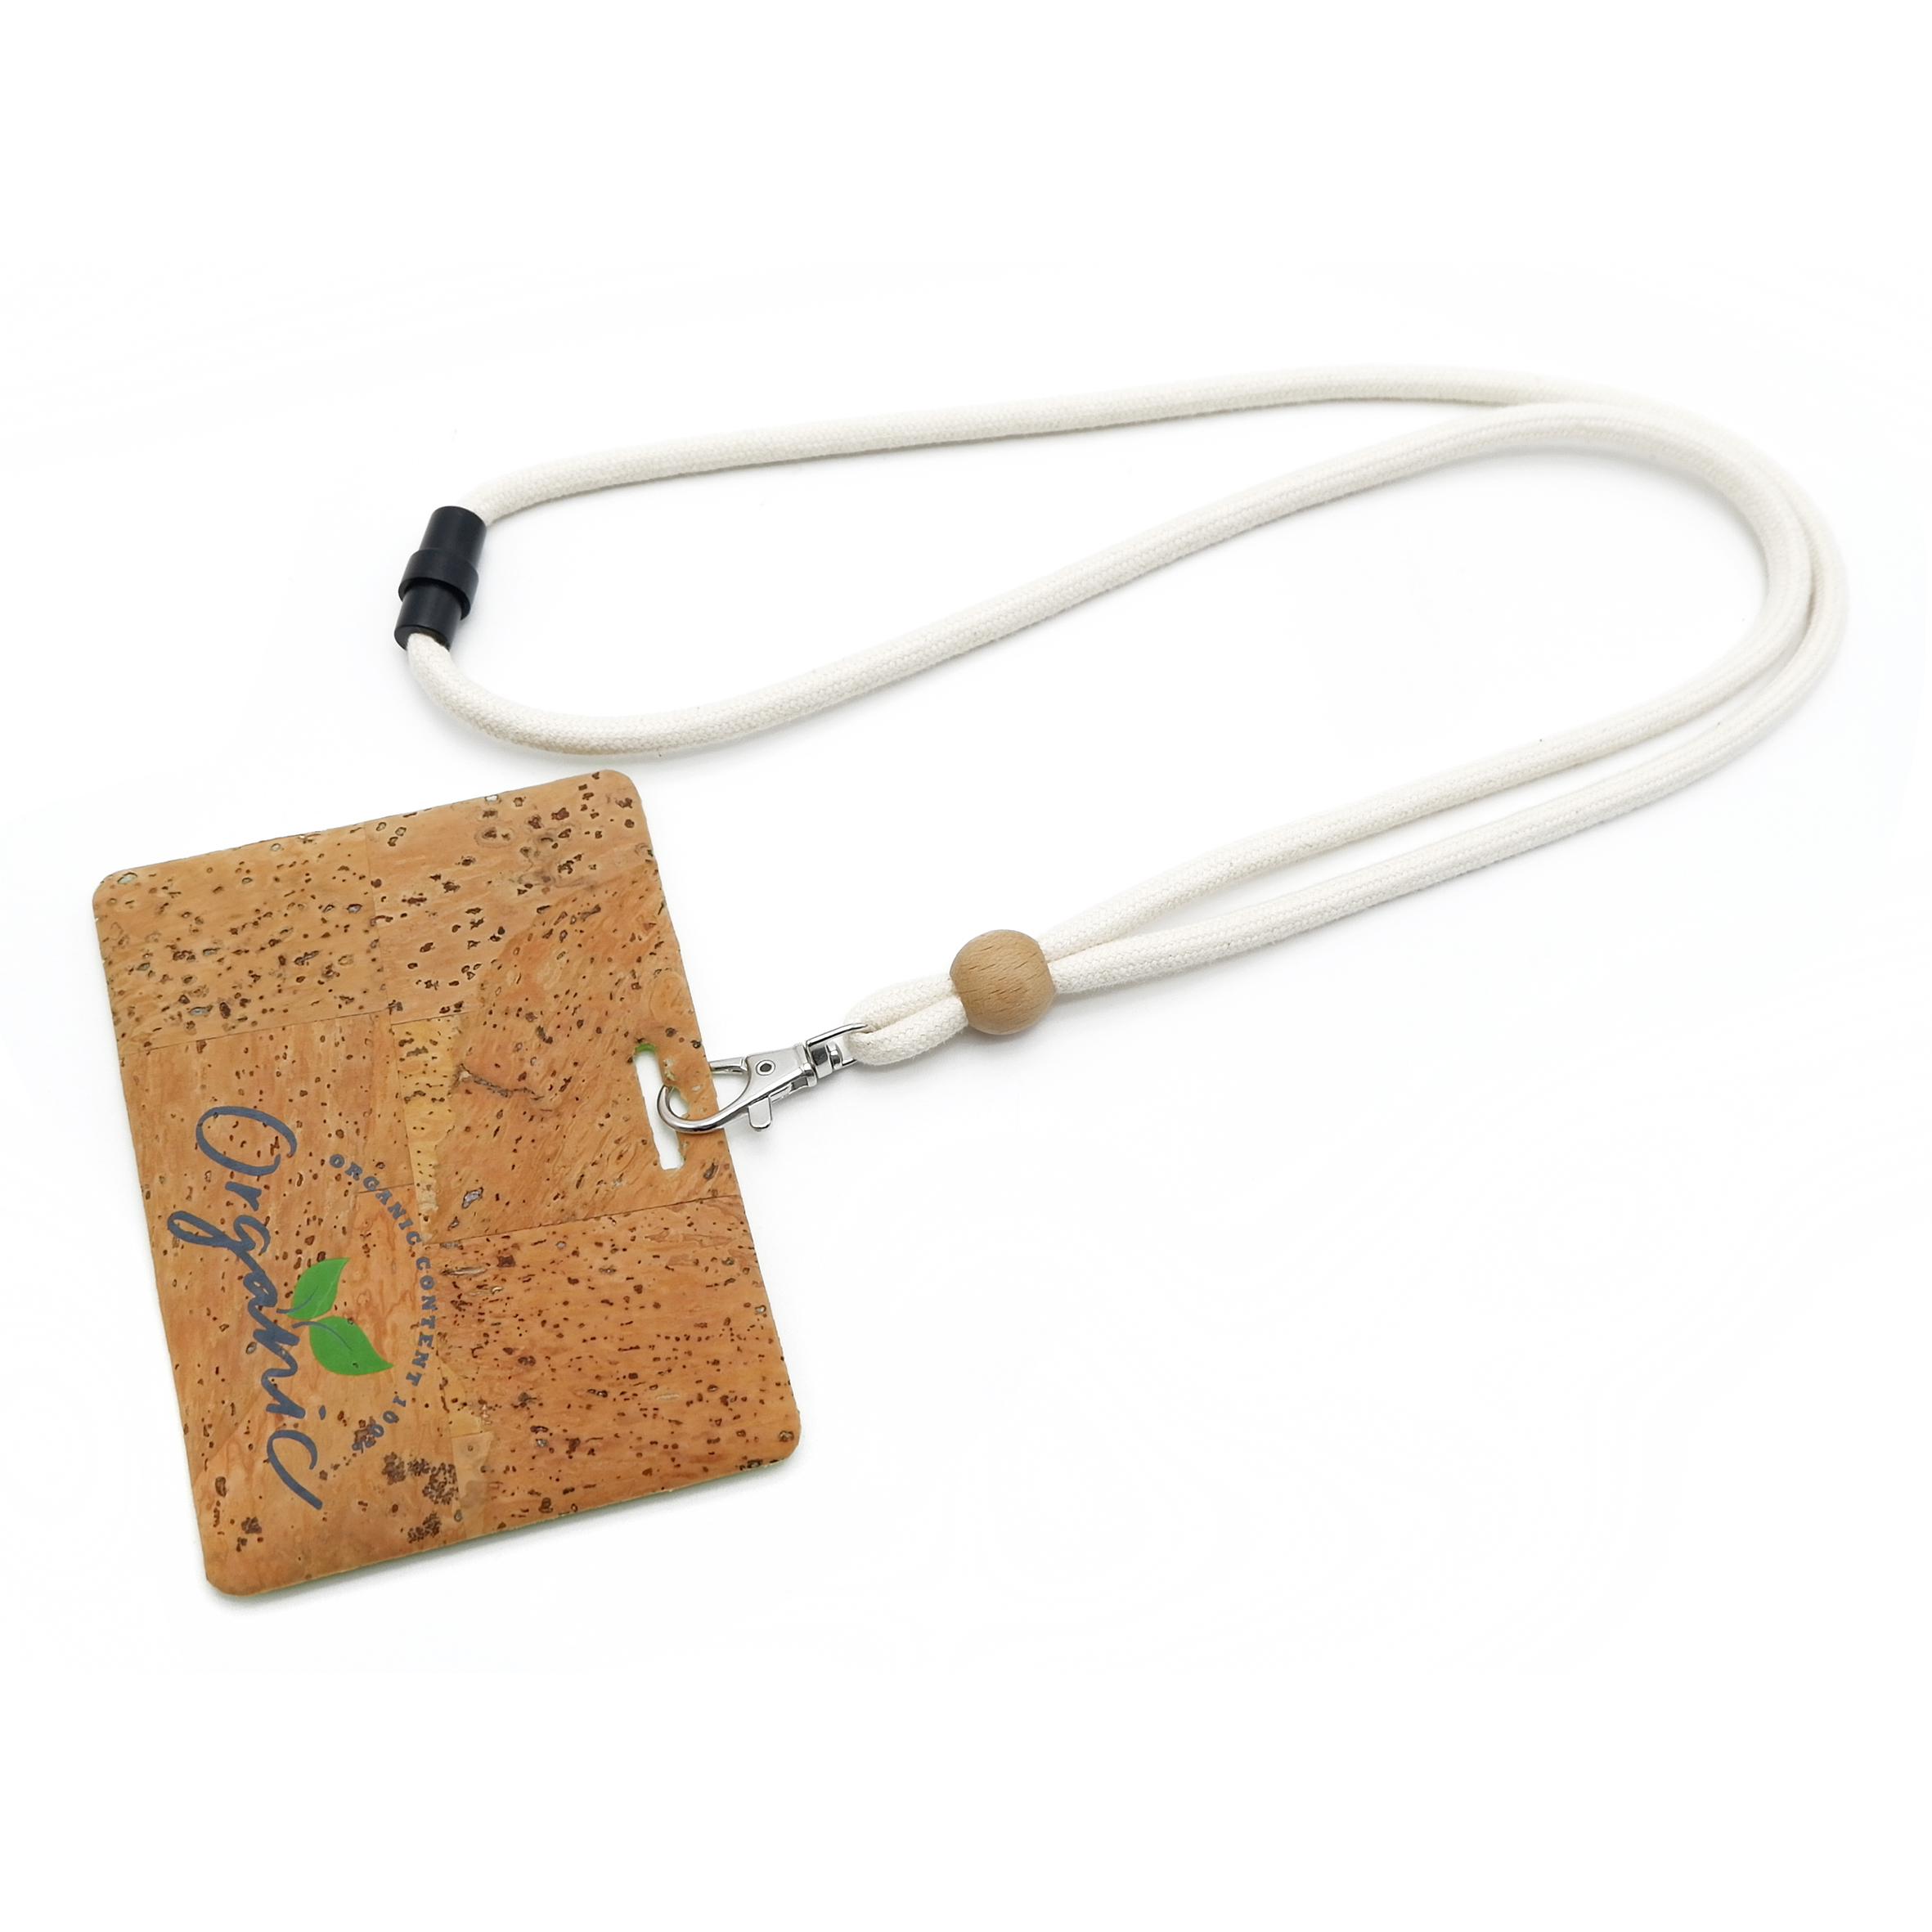 OS-0062 Cotton cord lanyard with cork badge holder